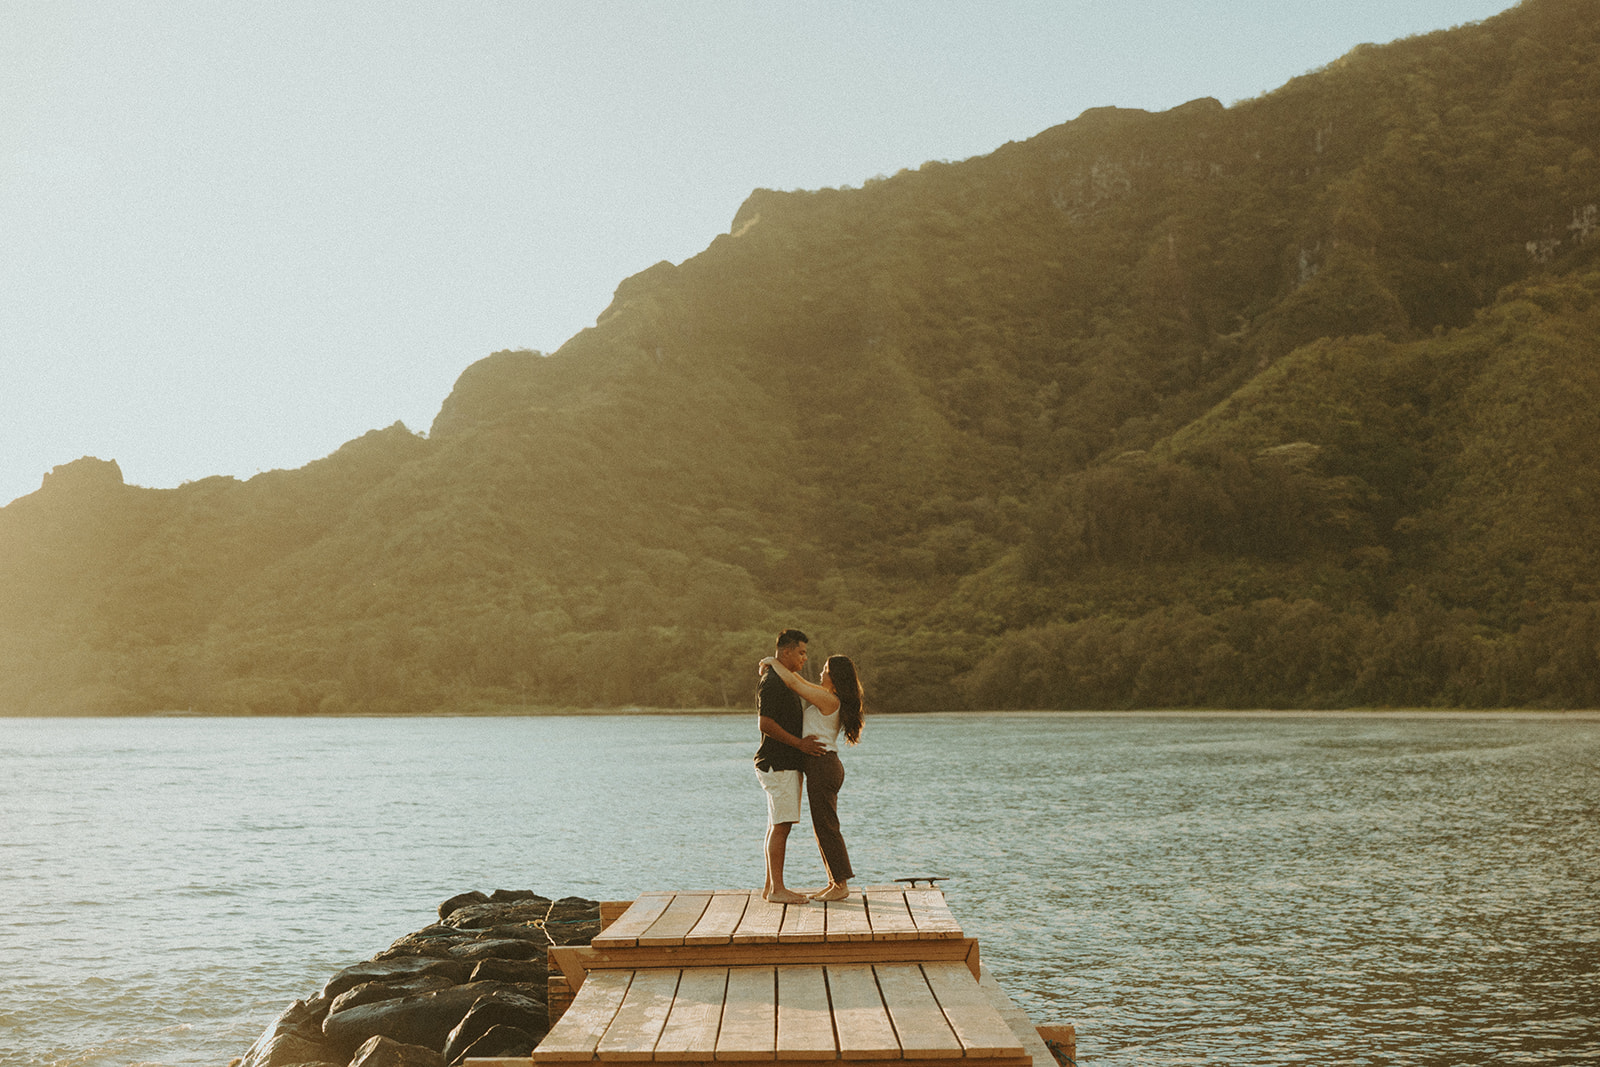 A couple posing on the beaches of hawaii for a honeymoon photoshoot